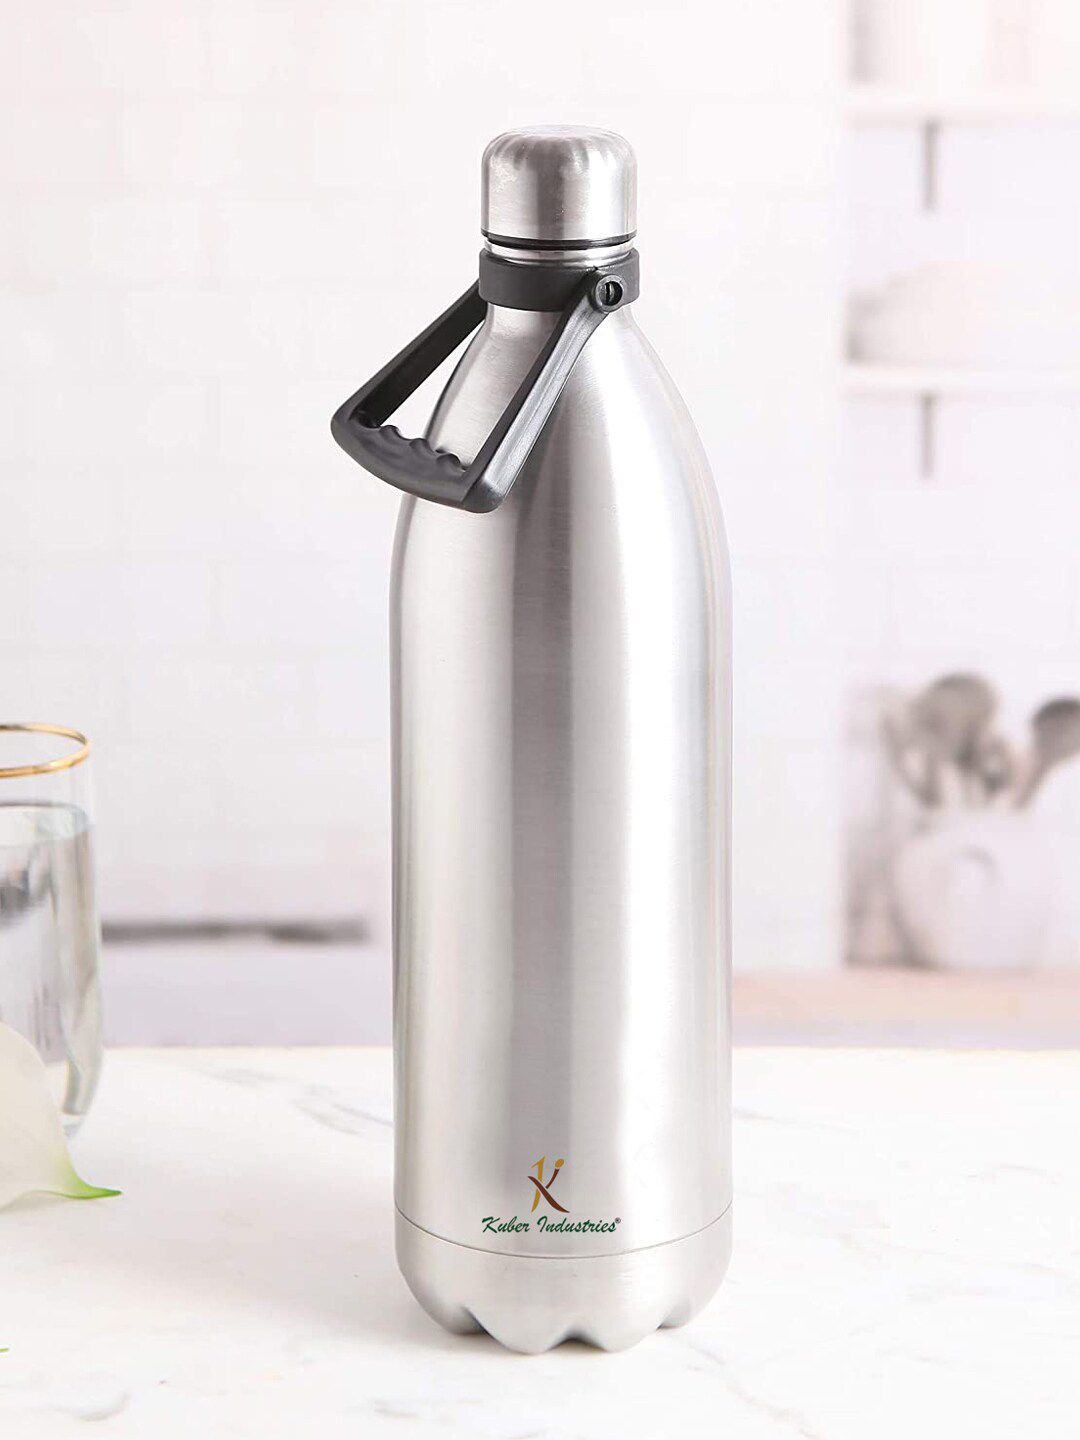 Kuber Industries Silver-Toned Solid Stainless Steel 24 Hours Plus Hot & Cold Water Bottle 2.2 Litre Price in India